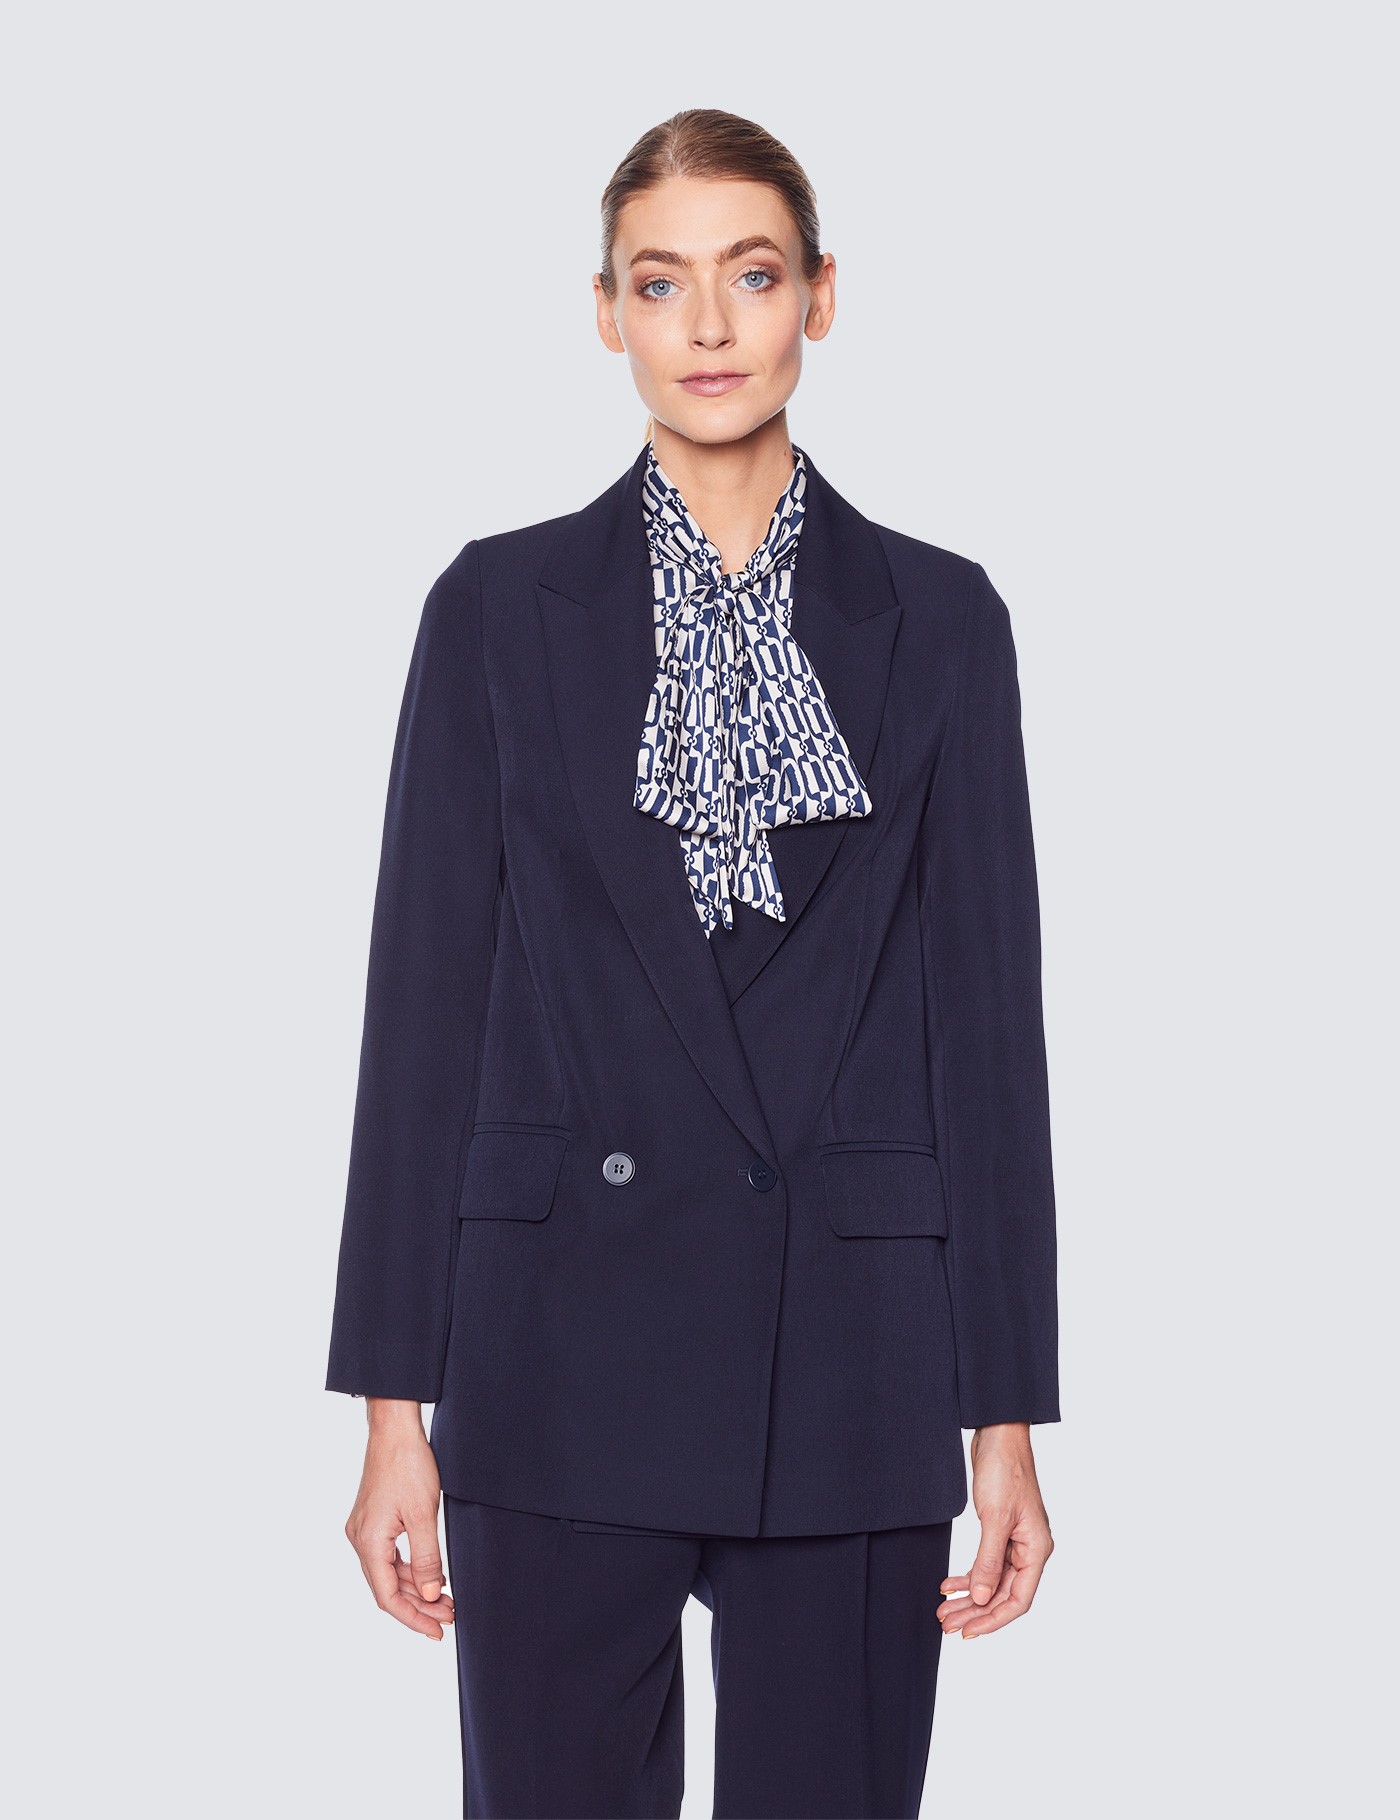 Women’s Navy Double Breasted Suit Jacket | Hawes & Curtis